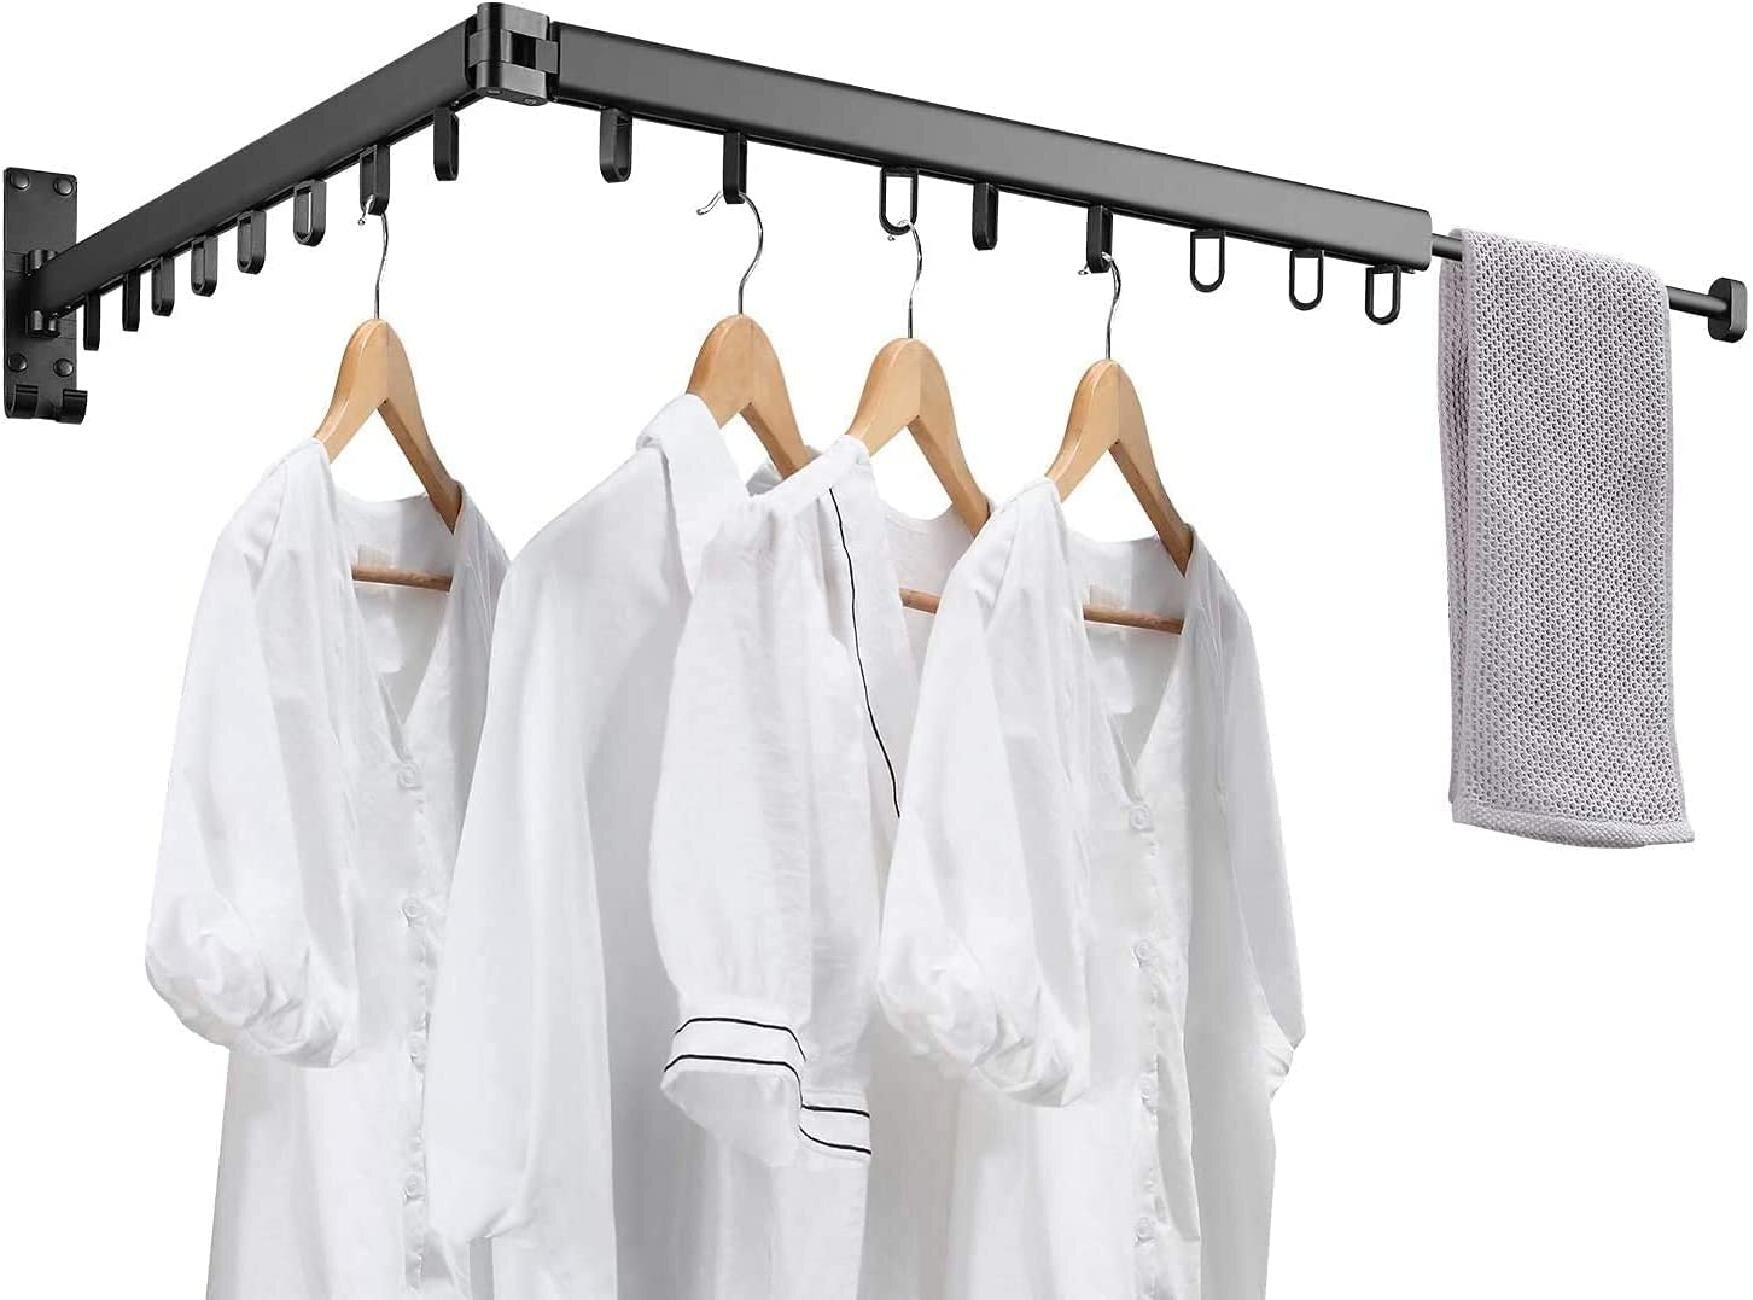 Folding Clothes Hanger Retractable Wall Mounted Drying Rack Aluminum for Bedroom Balcony Bathroom 